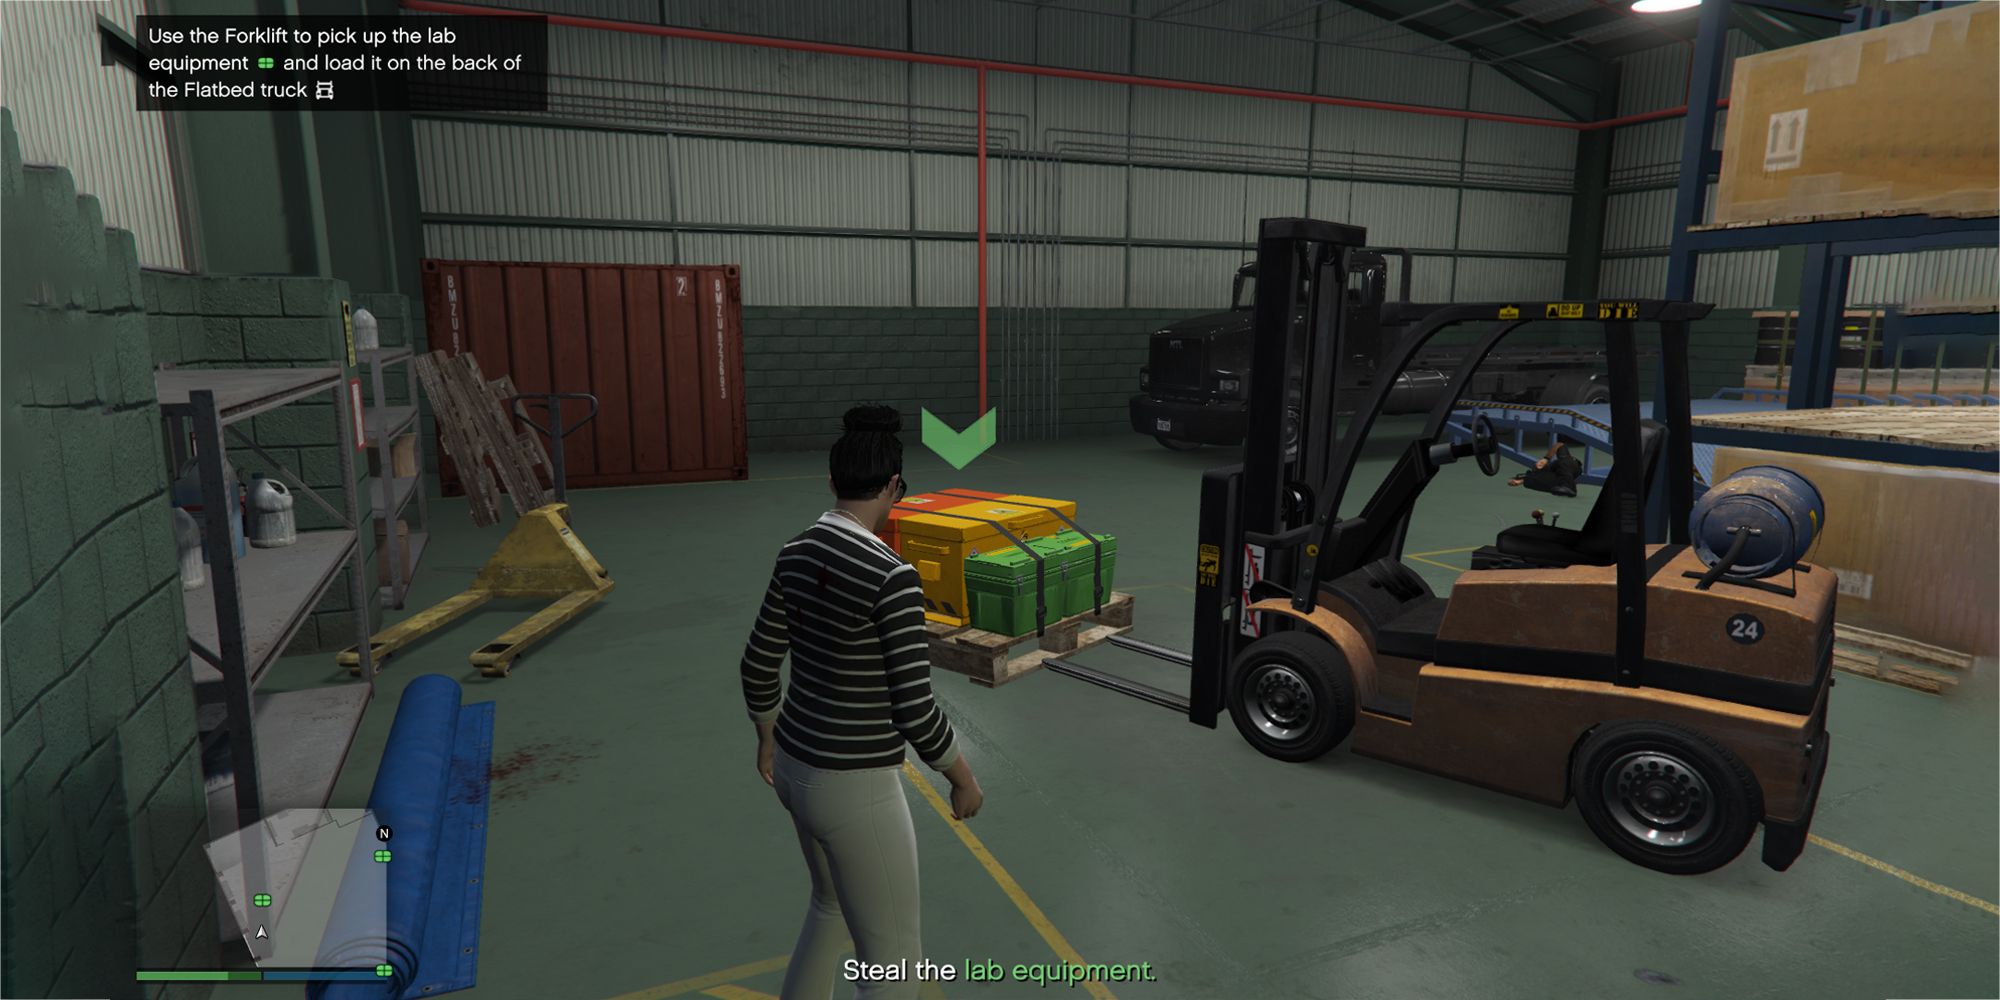 The image shows a Grand Theft Auto Online player standing in a warehouse next to a yellow forklift and equipment platform.  The palette has a green arrow pointing down at the top.